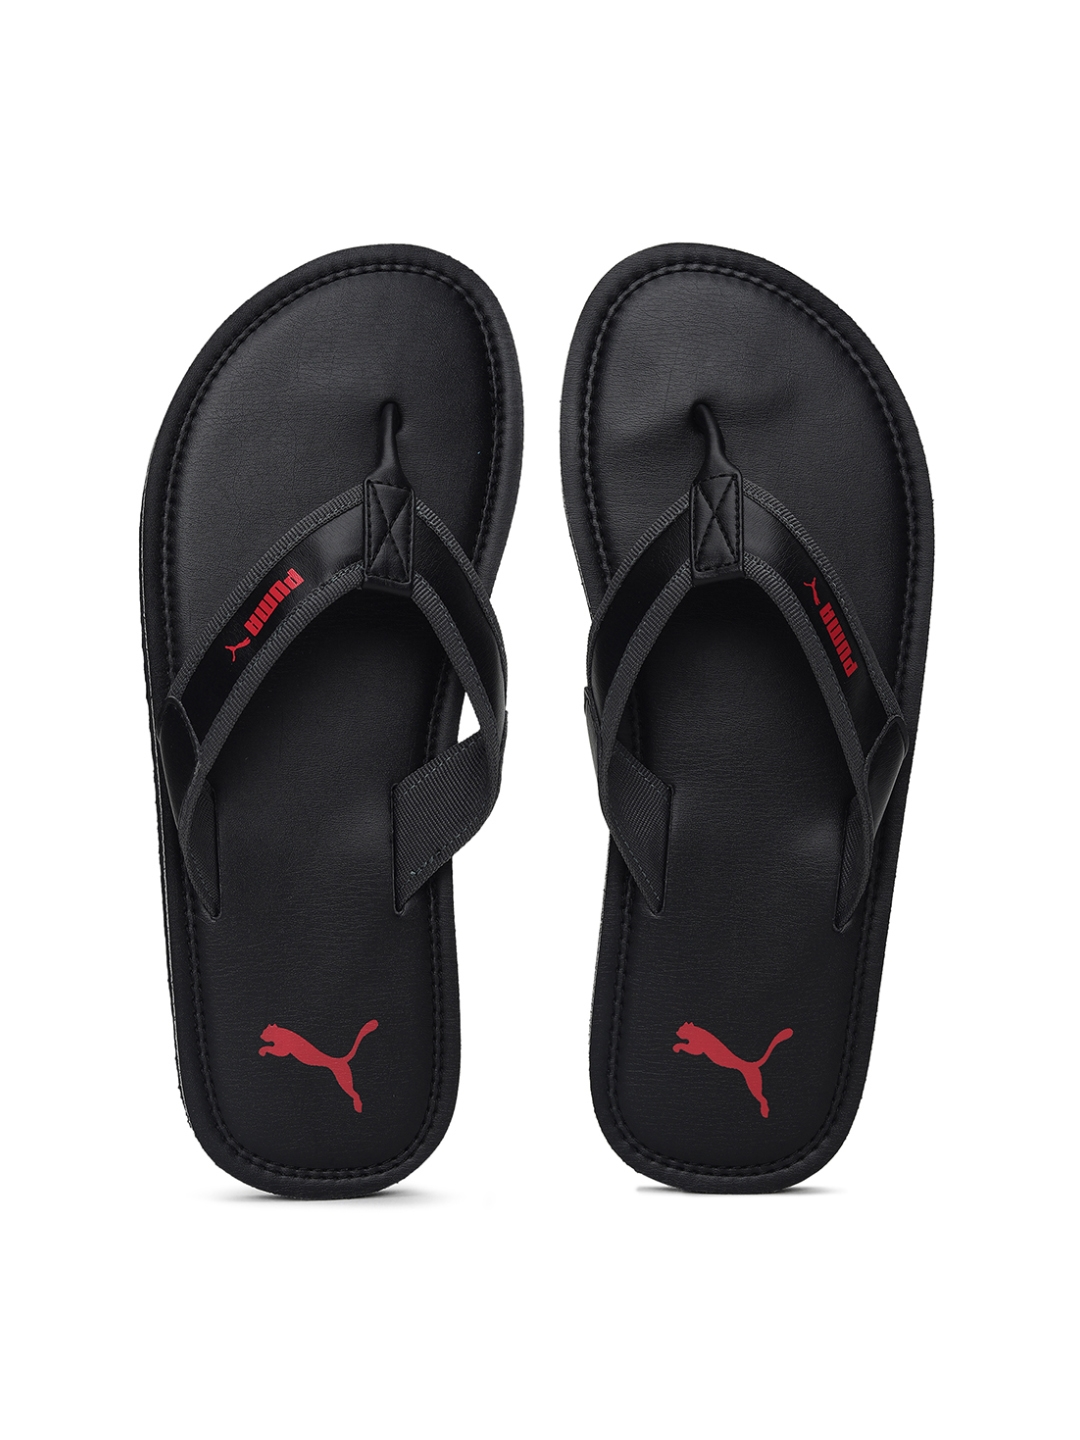 Puma Slippers - Shop Puma Slippers or Chappals Online at Best Price | Myntra